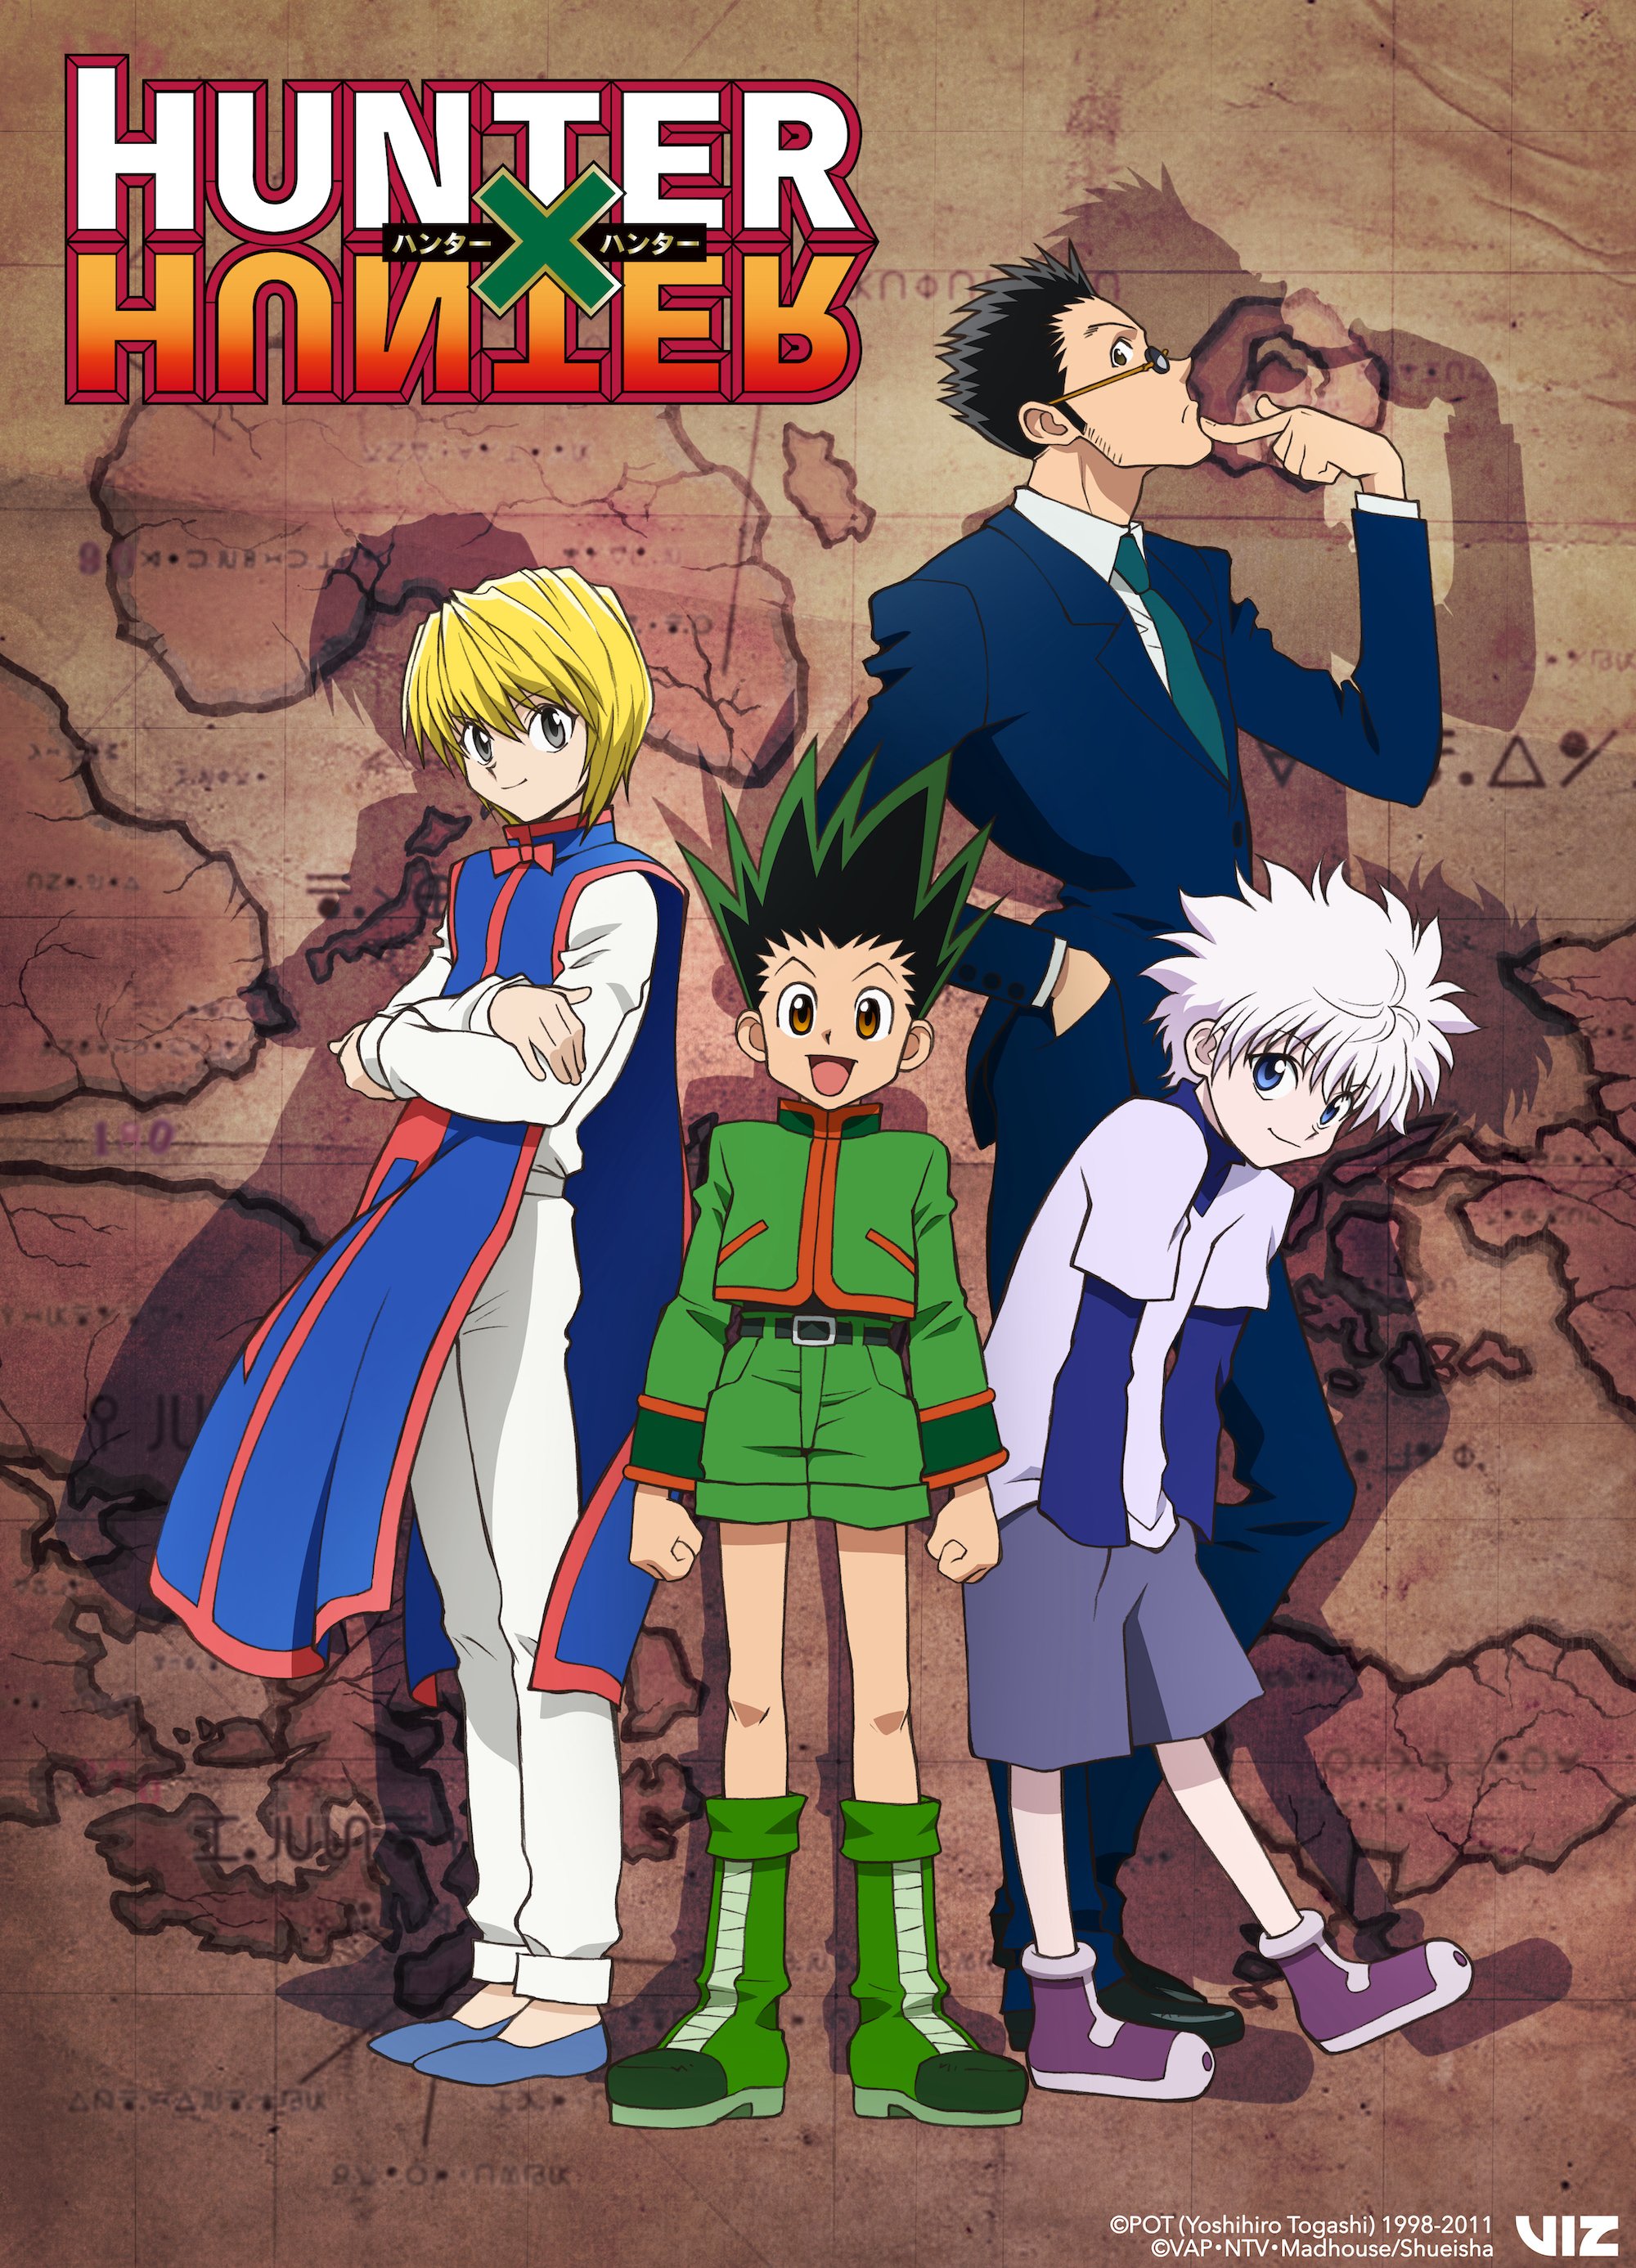 The key visual for Hunter x Hunter. Yoshiro Togashi's hit manga that has been in hiatus jail for the last four years, but he teased the Hunter X Hunter return on Twitter recently.